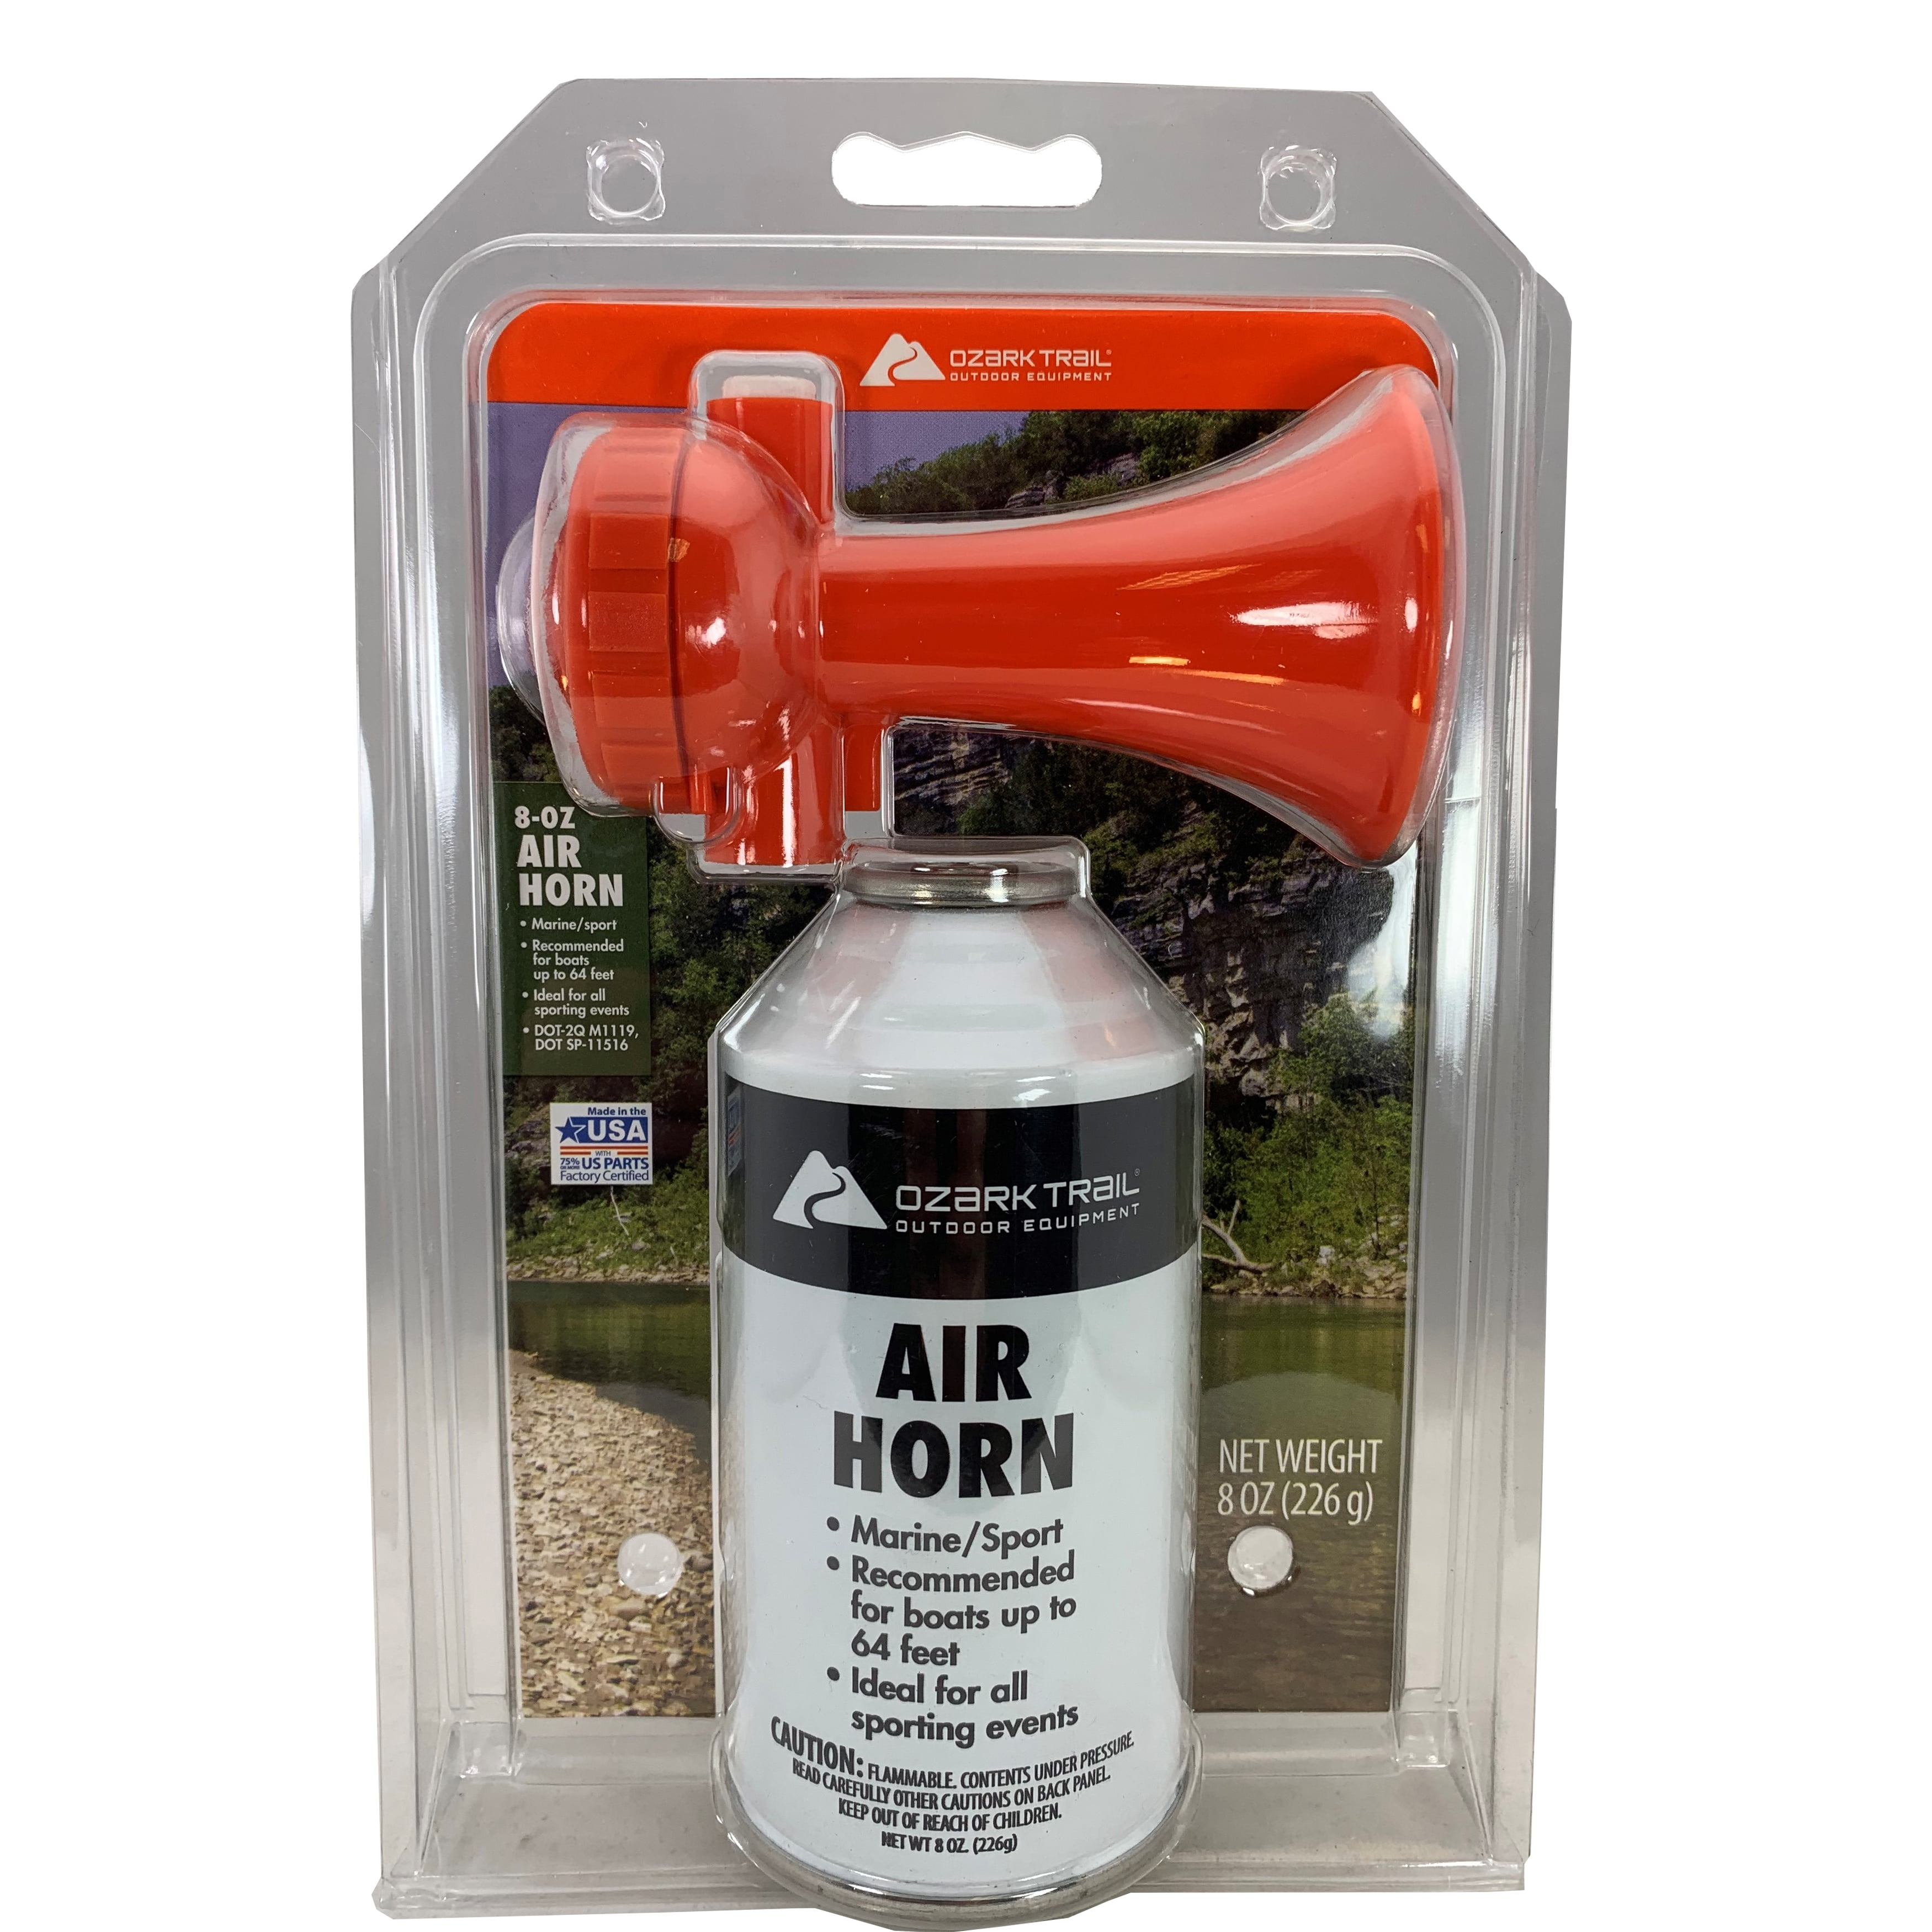 What Is The Best Way To Store Your Gas Horn? 